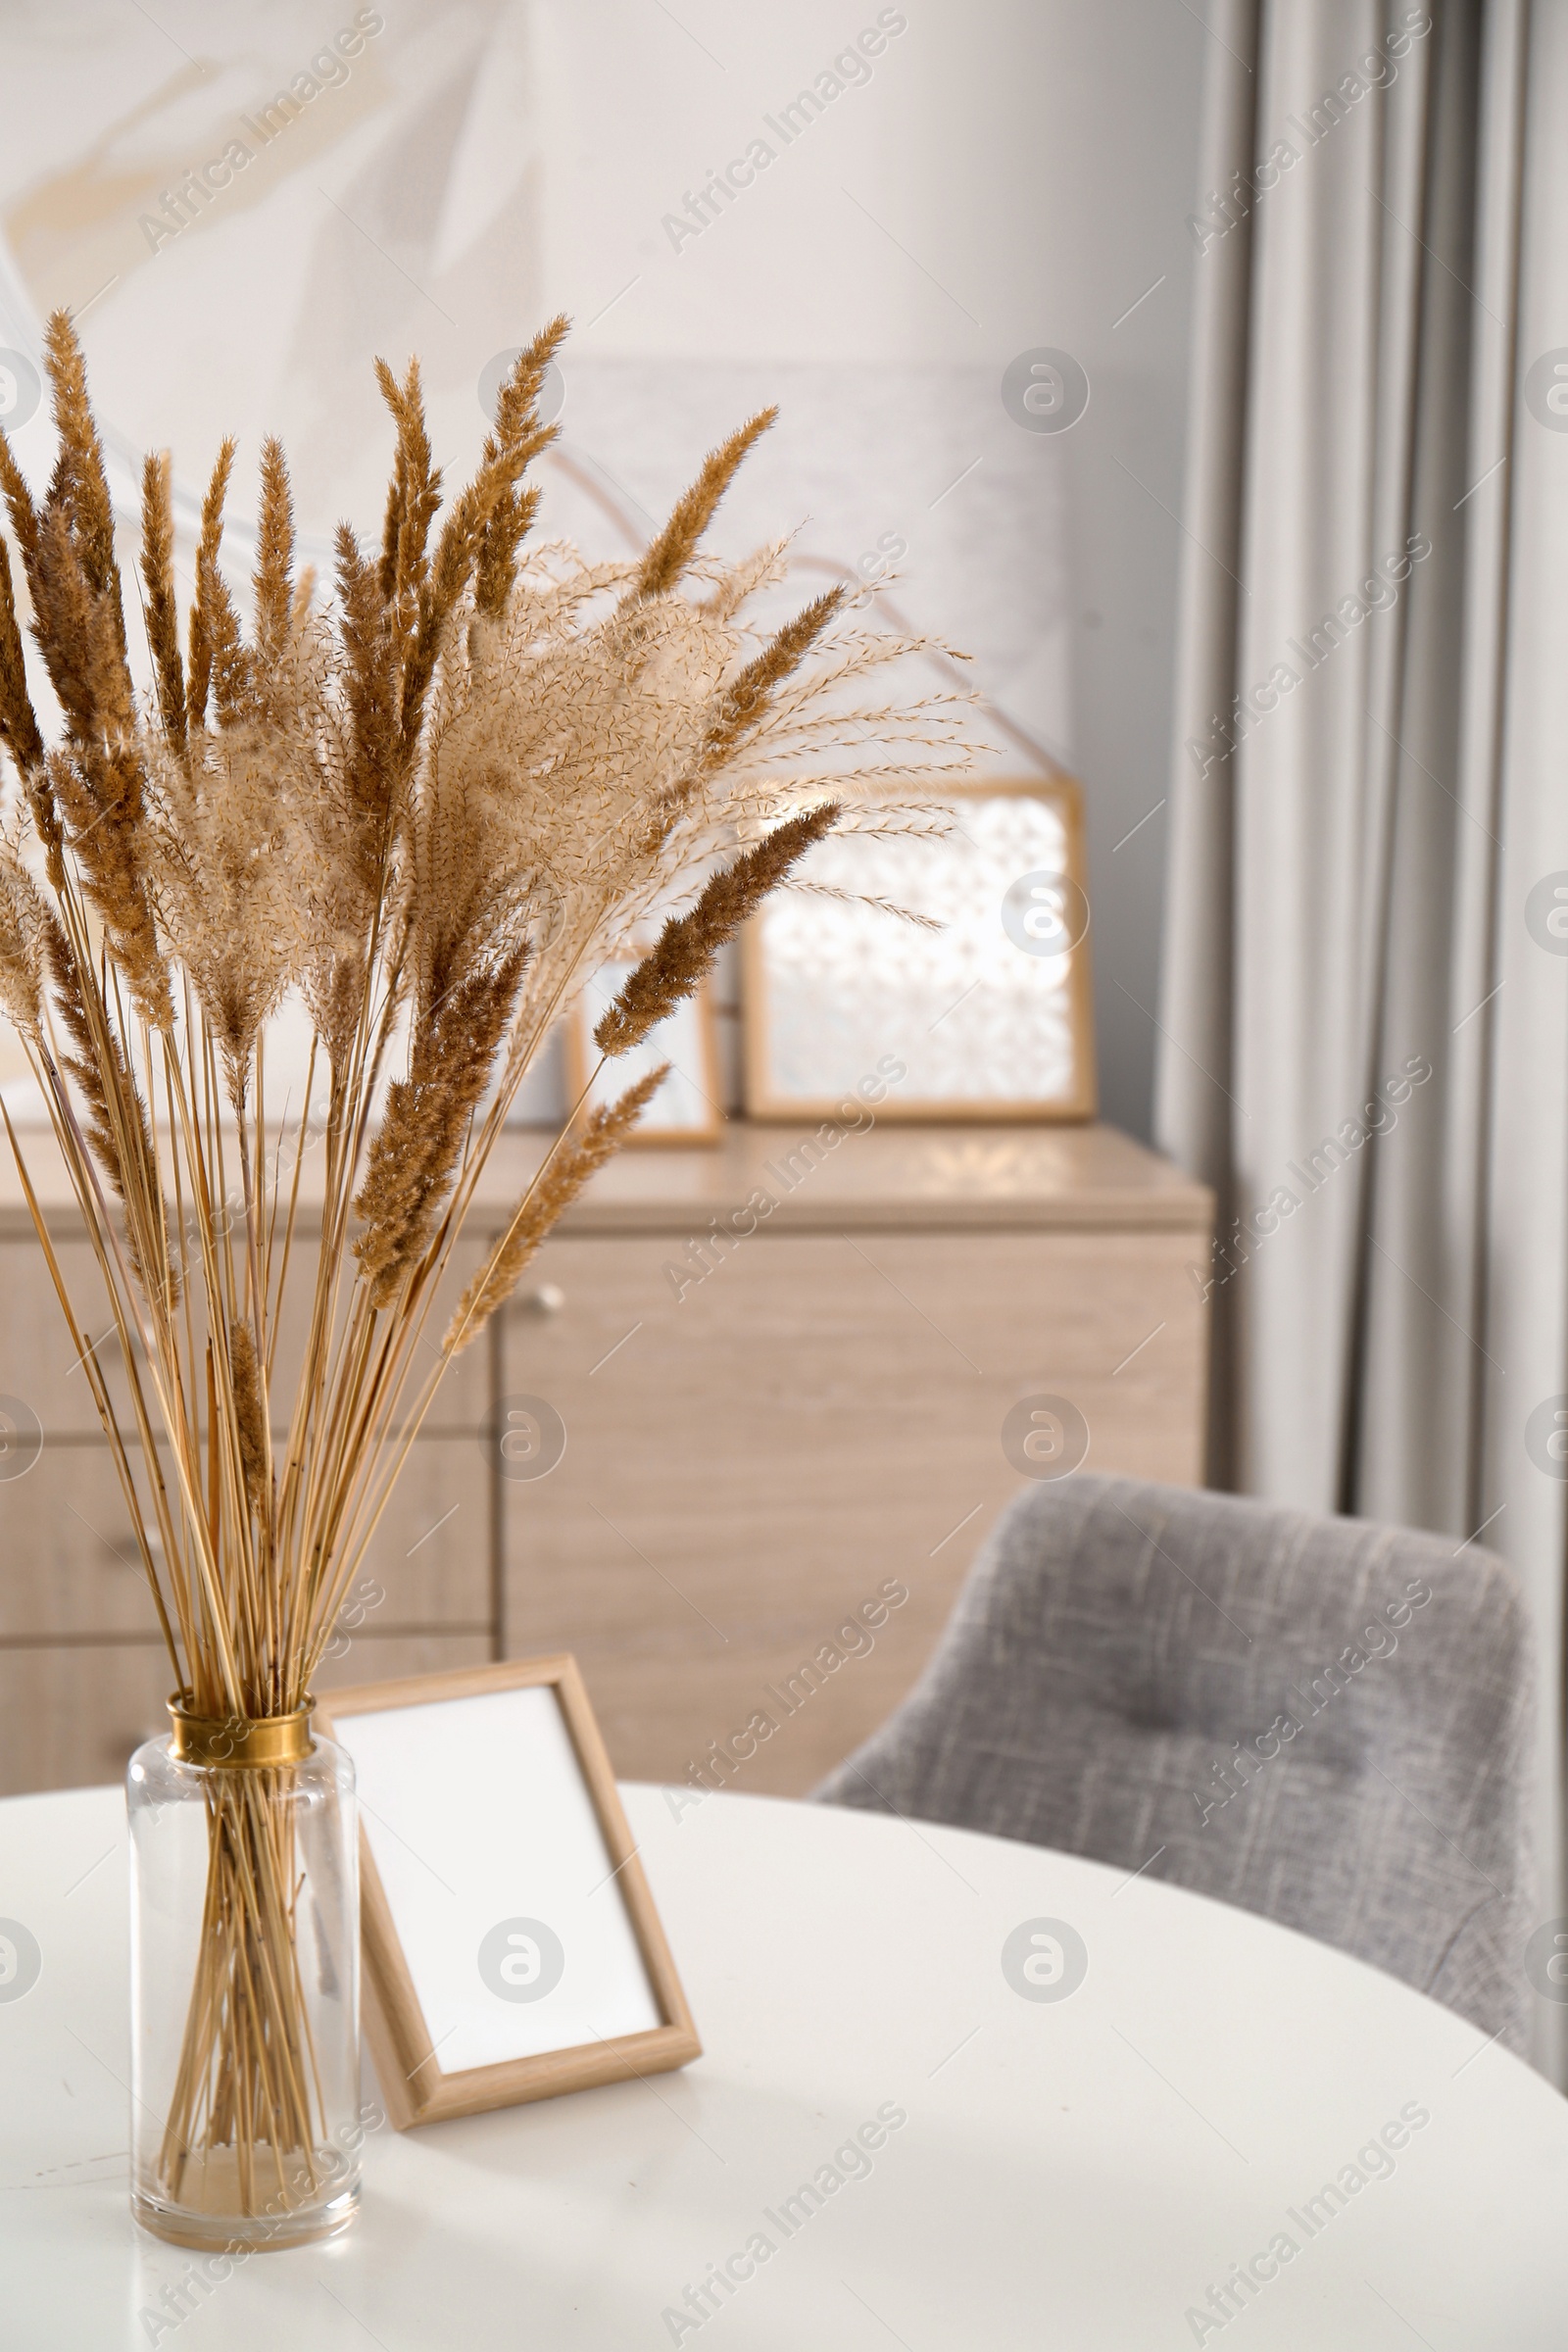 Photo of Dry plants and photoframe on white table indoors. Interior design